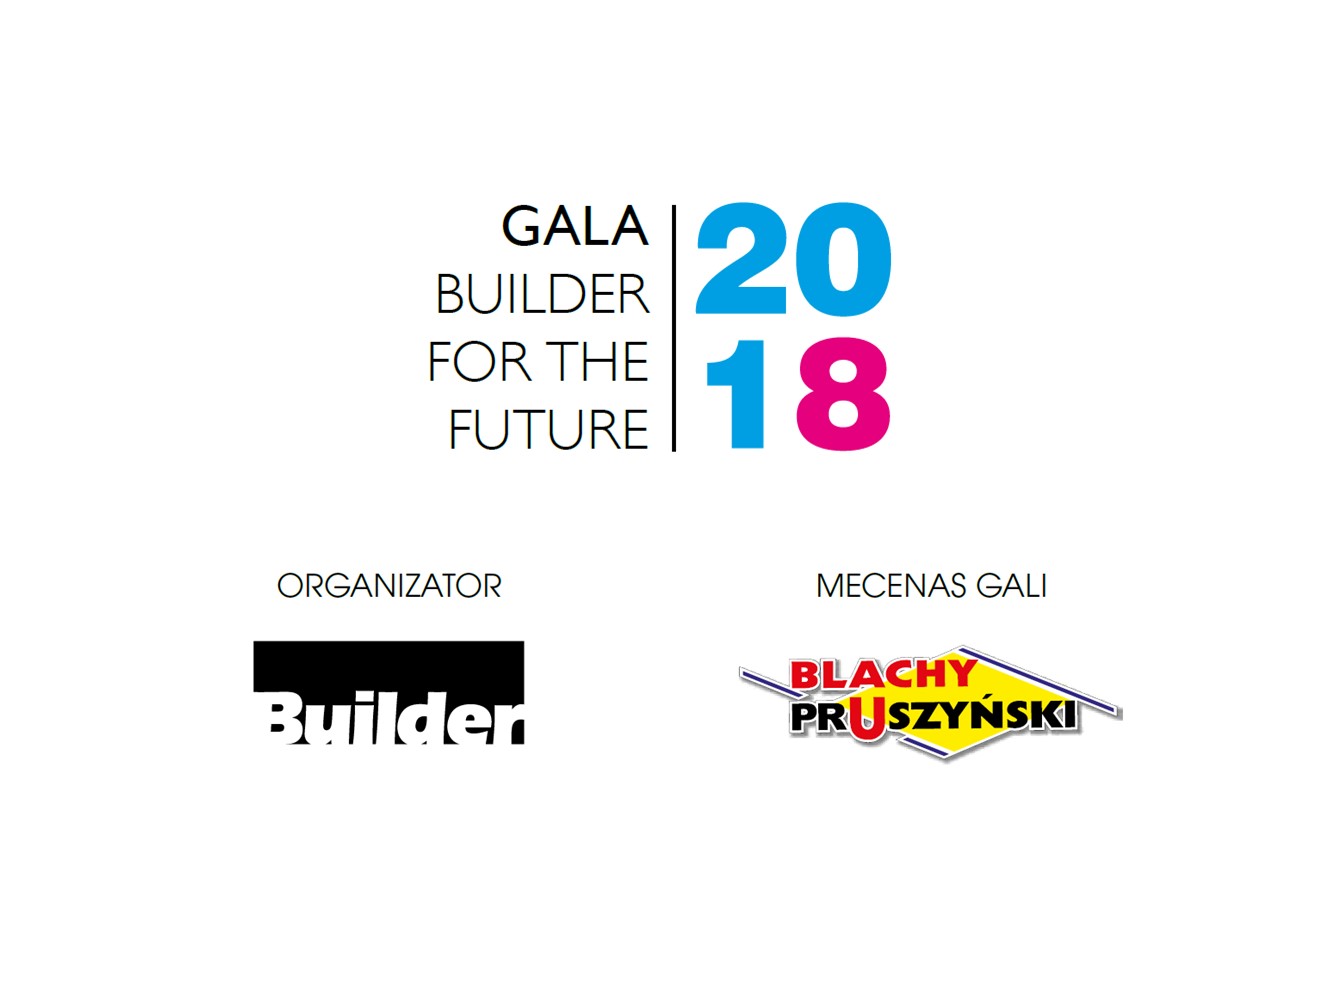 GALA BUILDER FOR THE FUTURE 2018